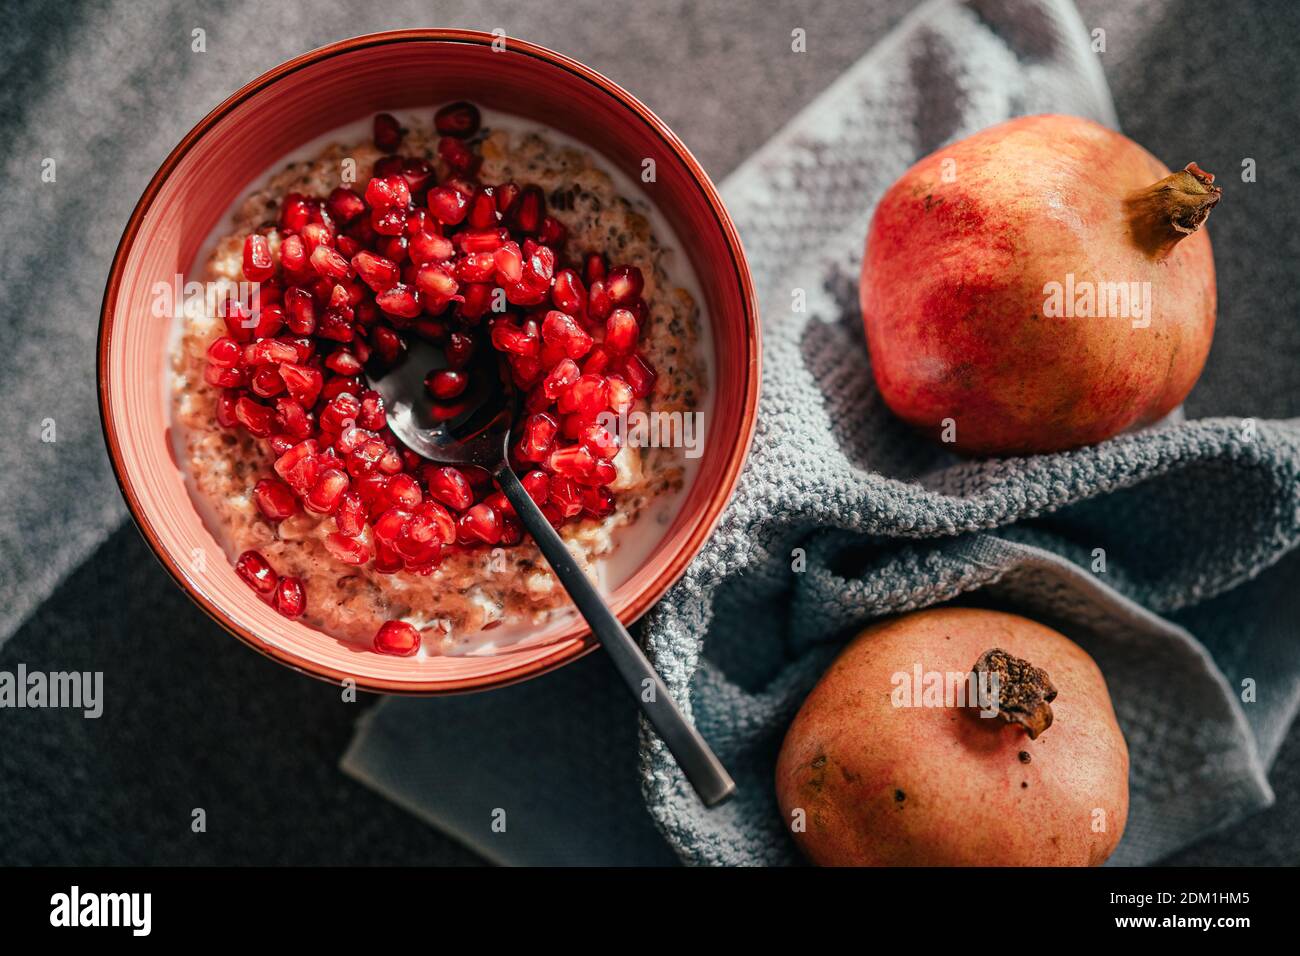 Homemade low carb diet almond and coconut flakes porridge with red pomegranate seeds.Morning light.Healthy organic nutritious vegan breakfast.Chia see Stock Photo